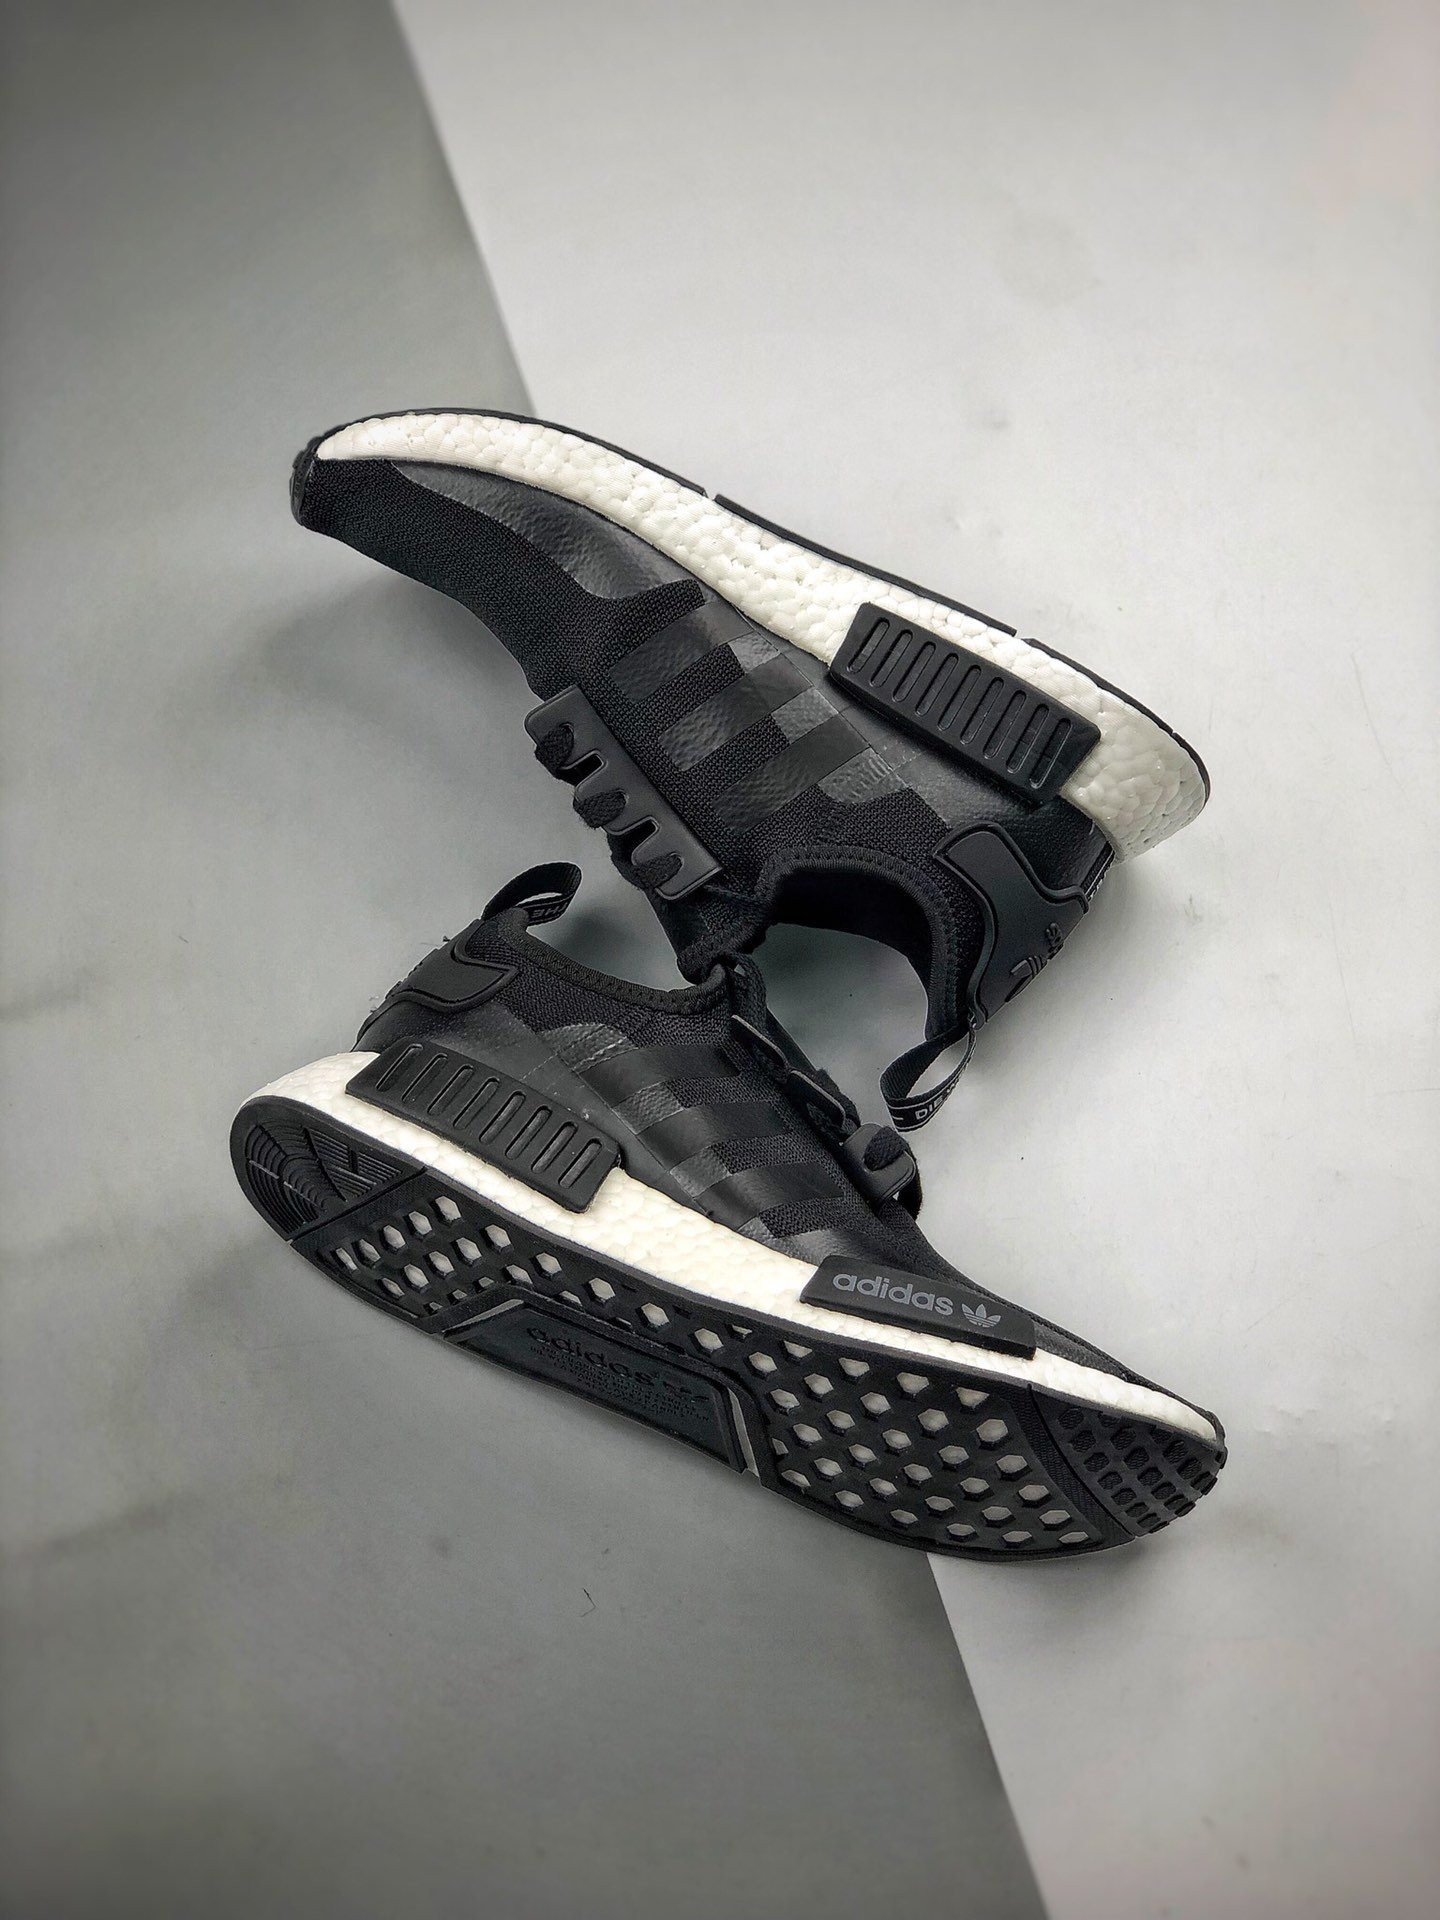 Adidas NMD R1 Black Vapour Pink EE5082 For Sale